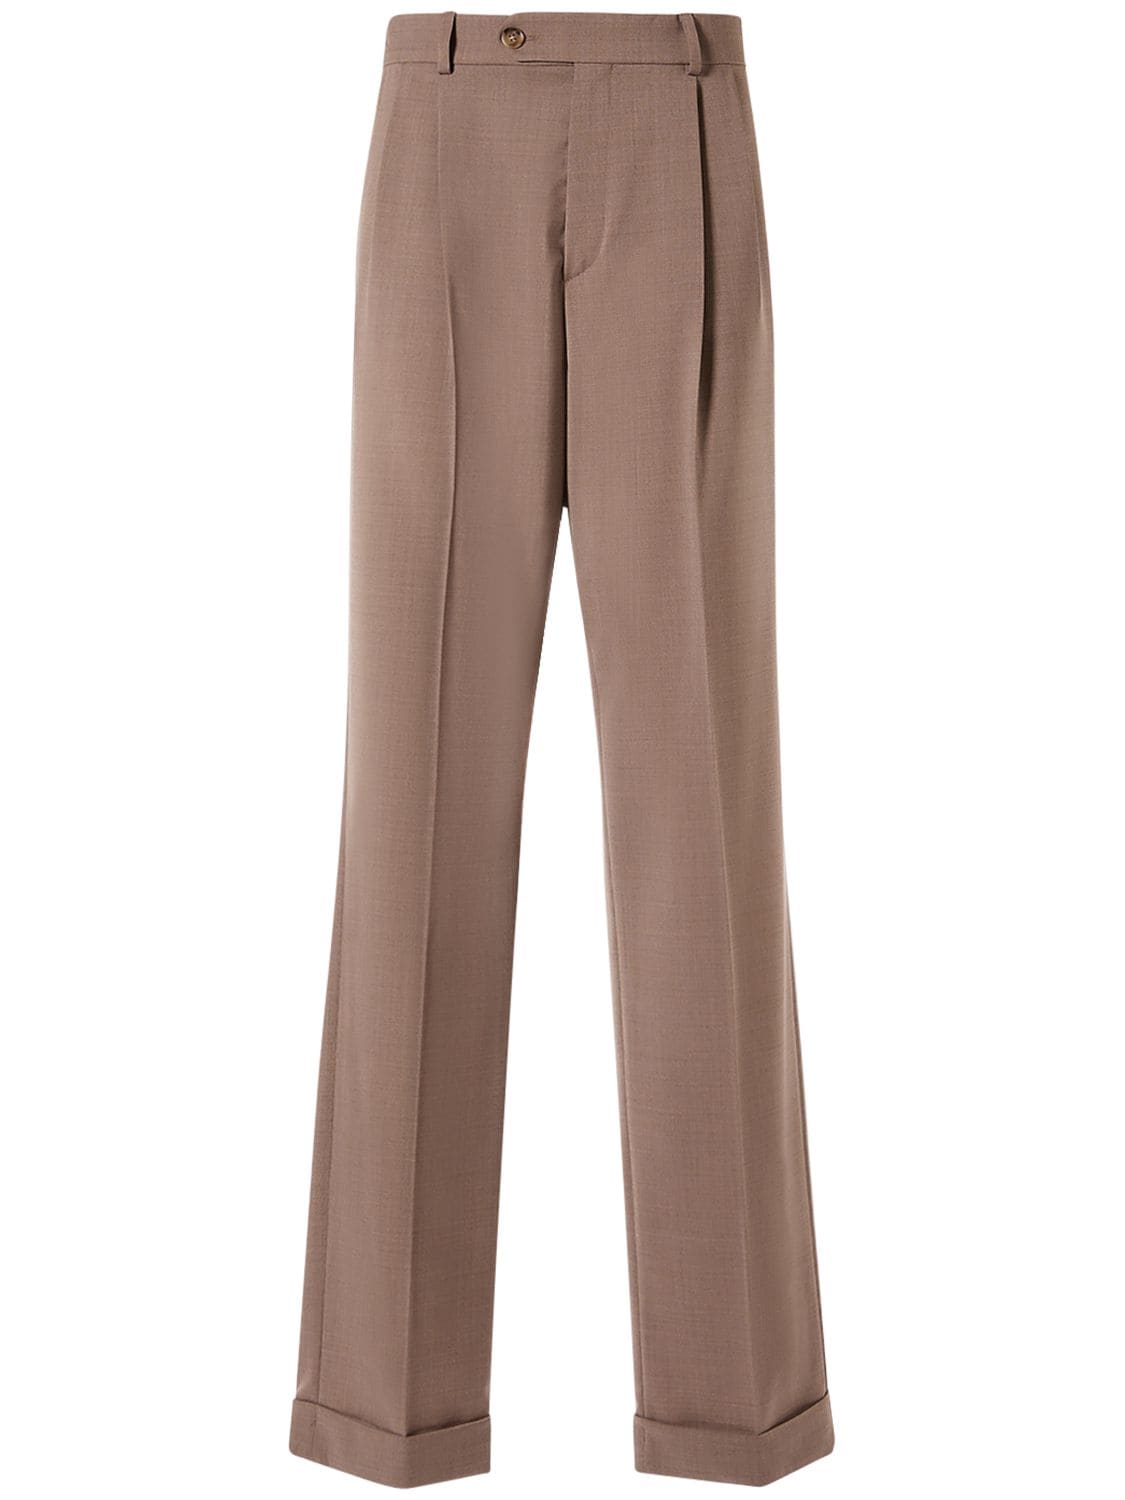 Image of Ferito Stretch Wool Low Waist Pants